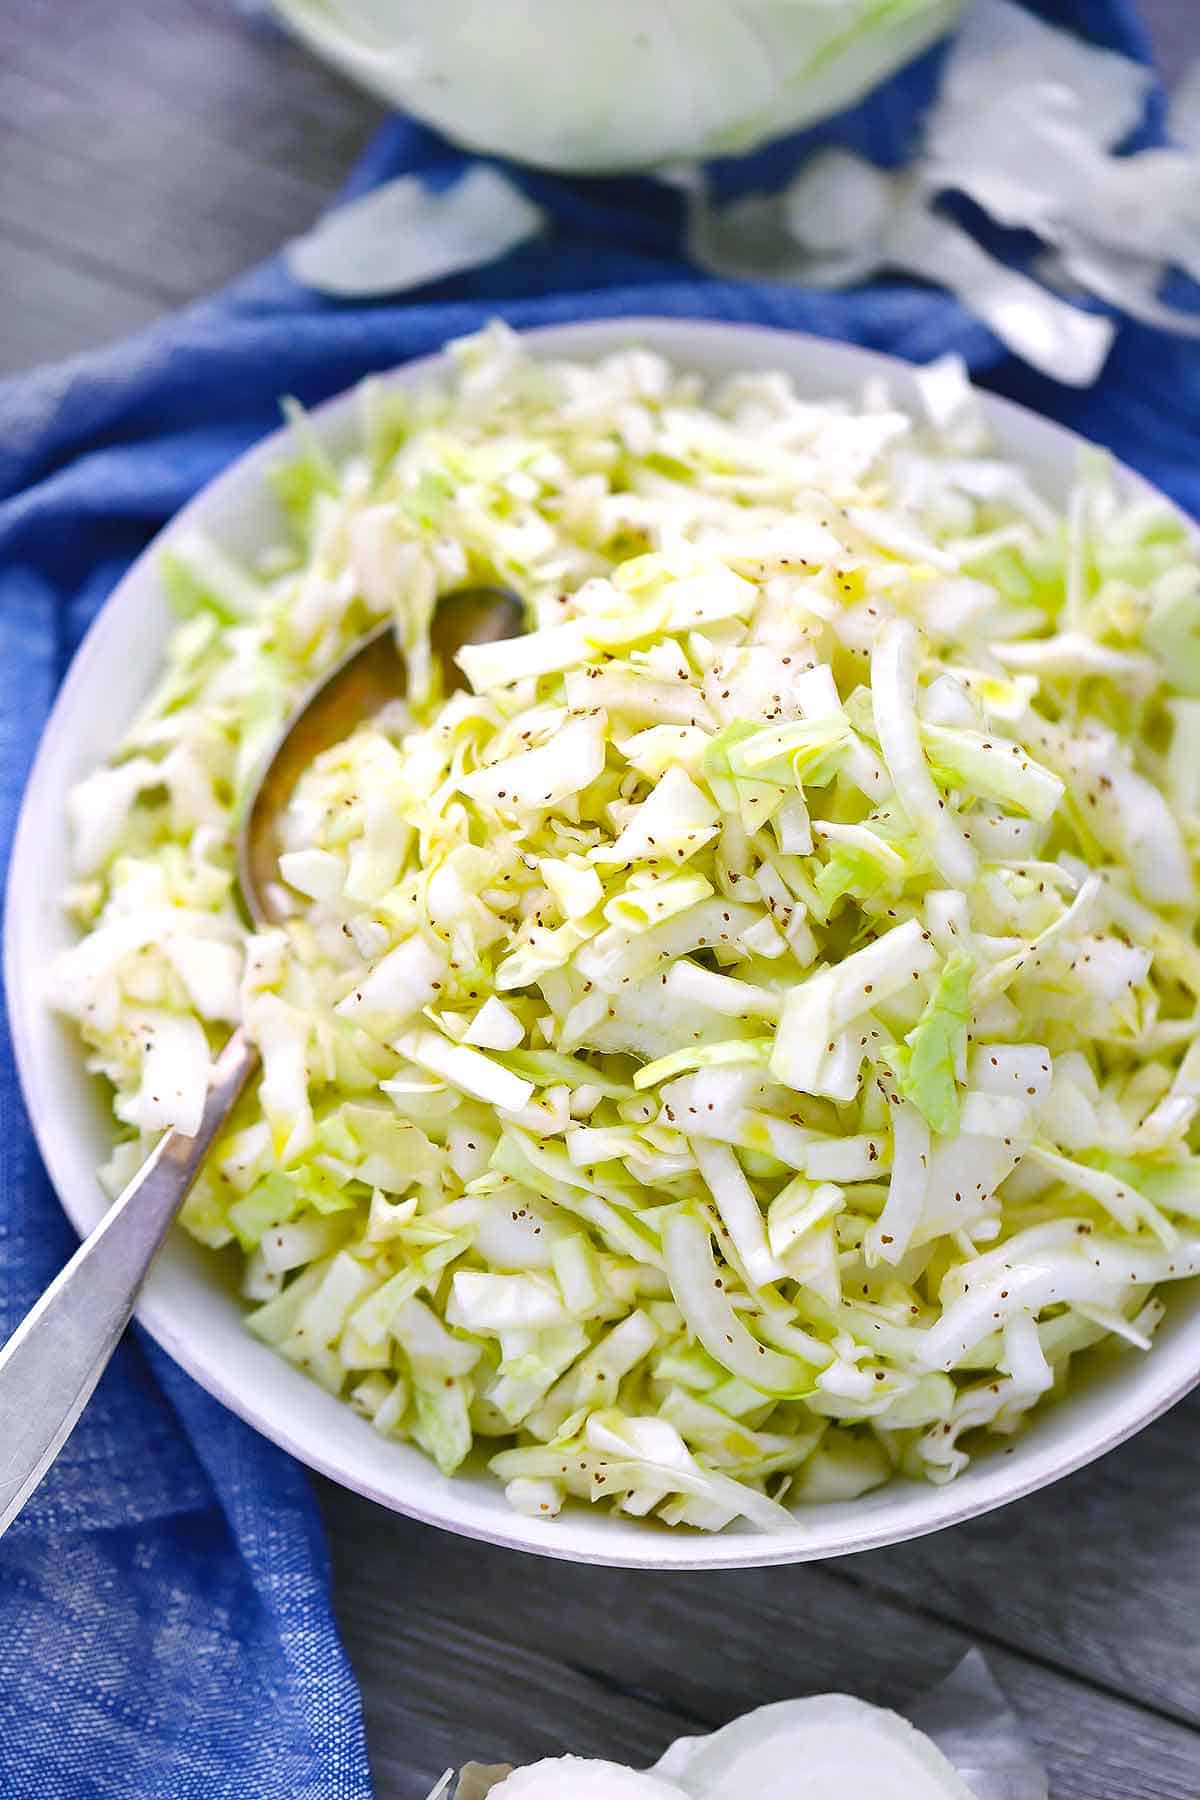 A white bowl of no mayo coleslaw with celery seed and a spoon on a blue towel.